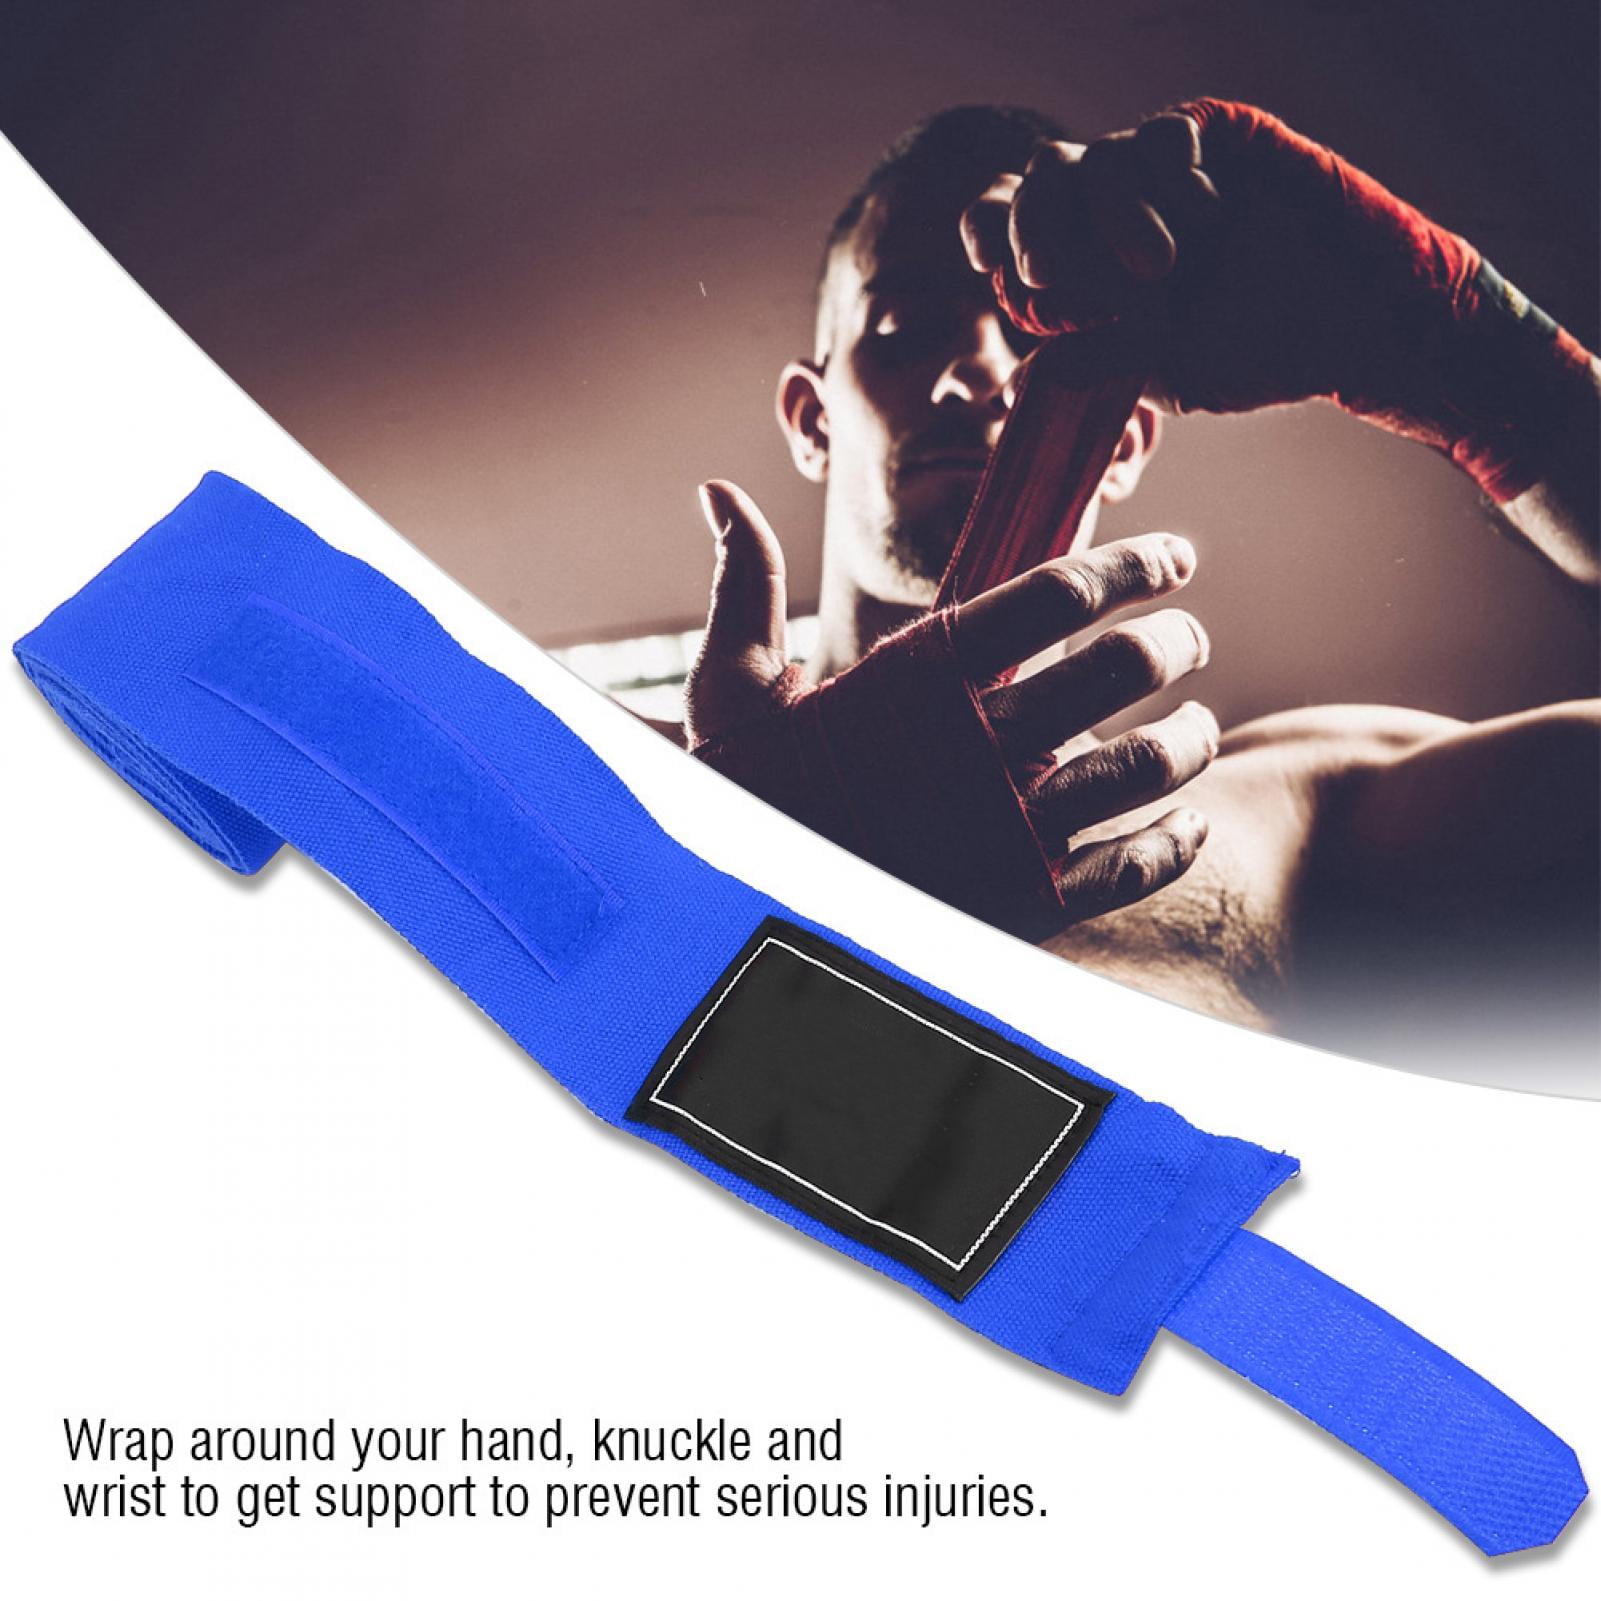 Sanda Taekwondo Muay Thai Sweat-Absorbent Tied Hands, Protective Gear Elastic Boxing Bandage Two Sets Wrapped Around The Band 